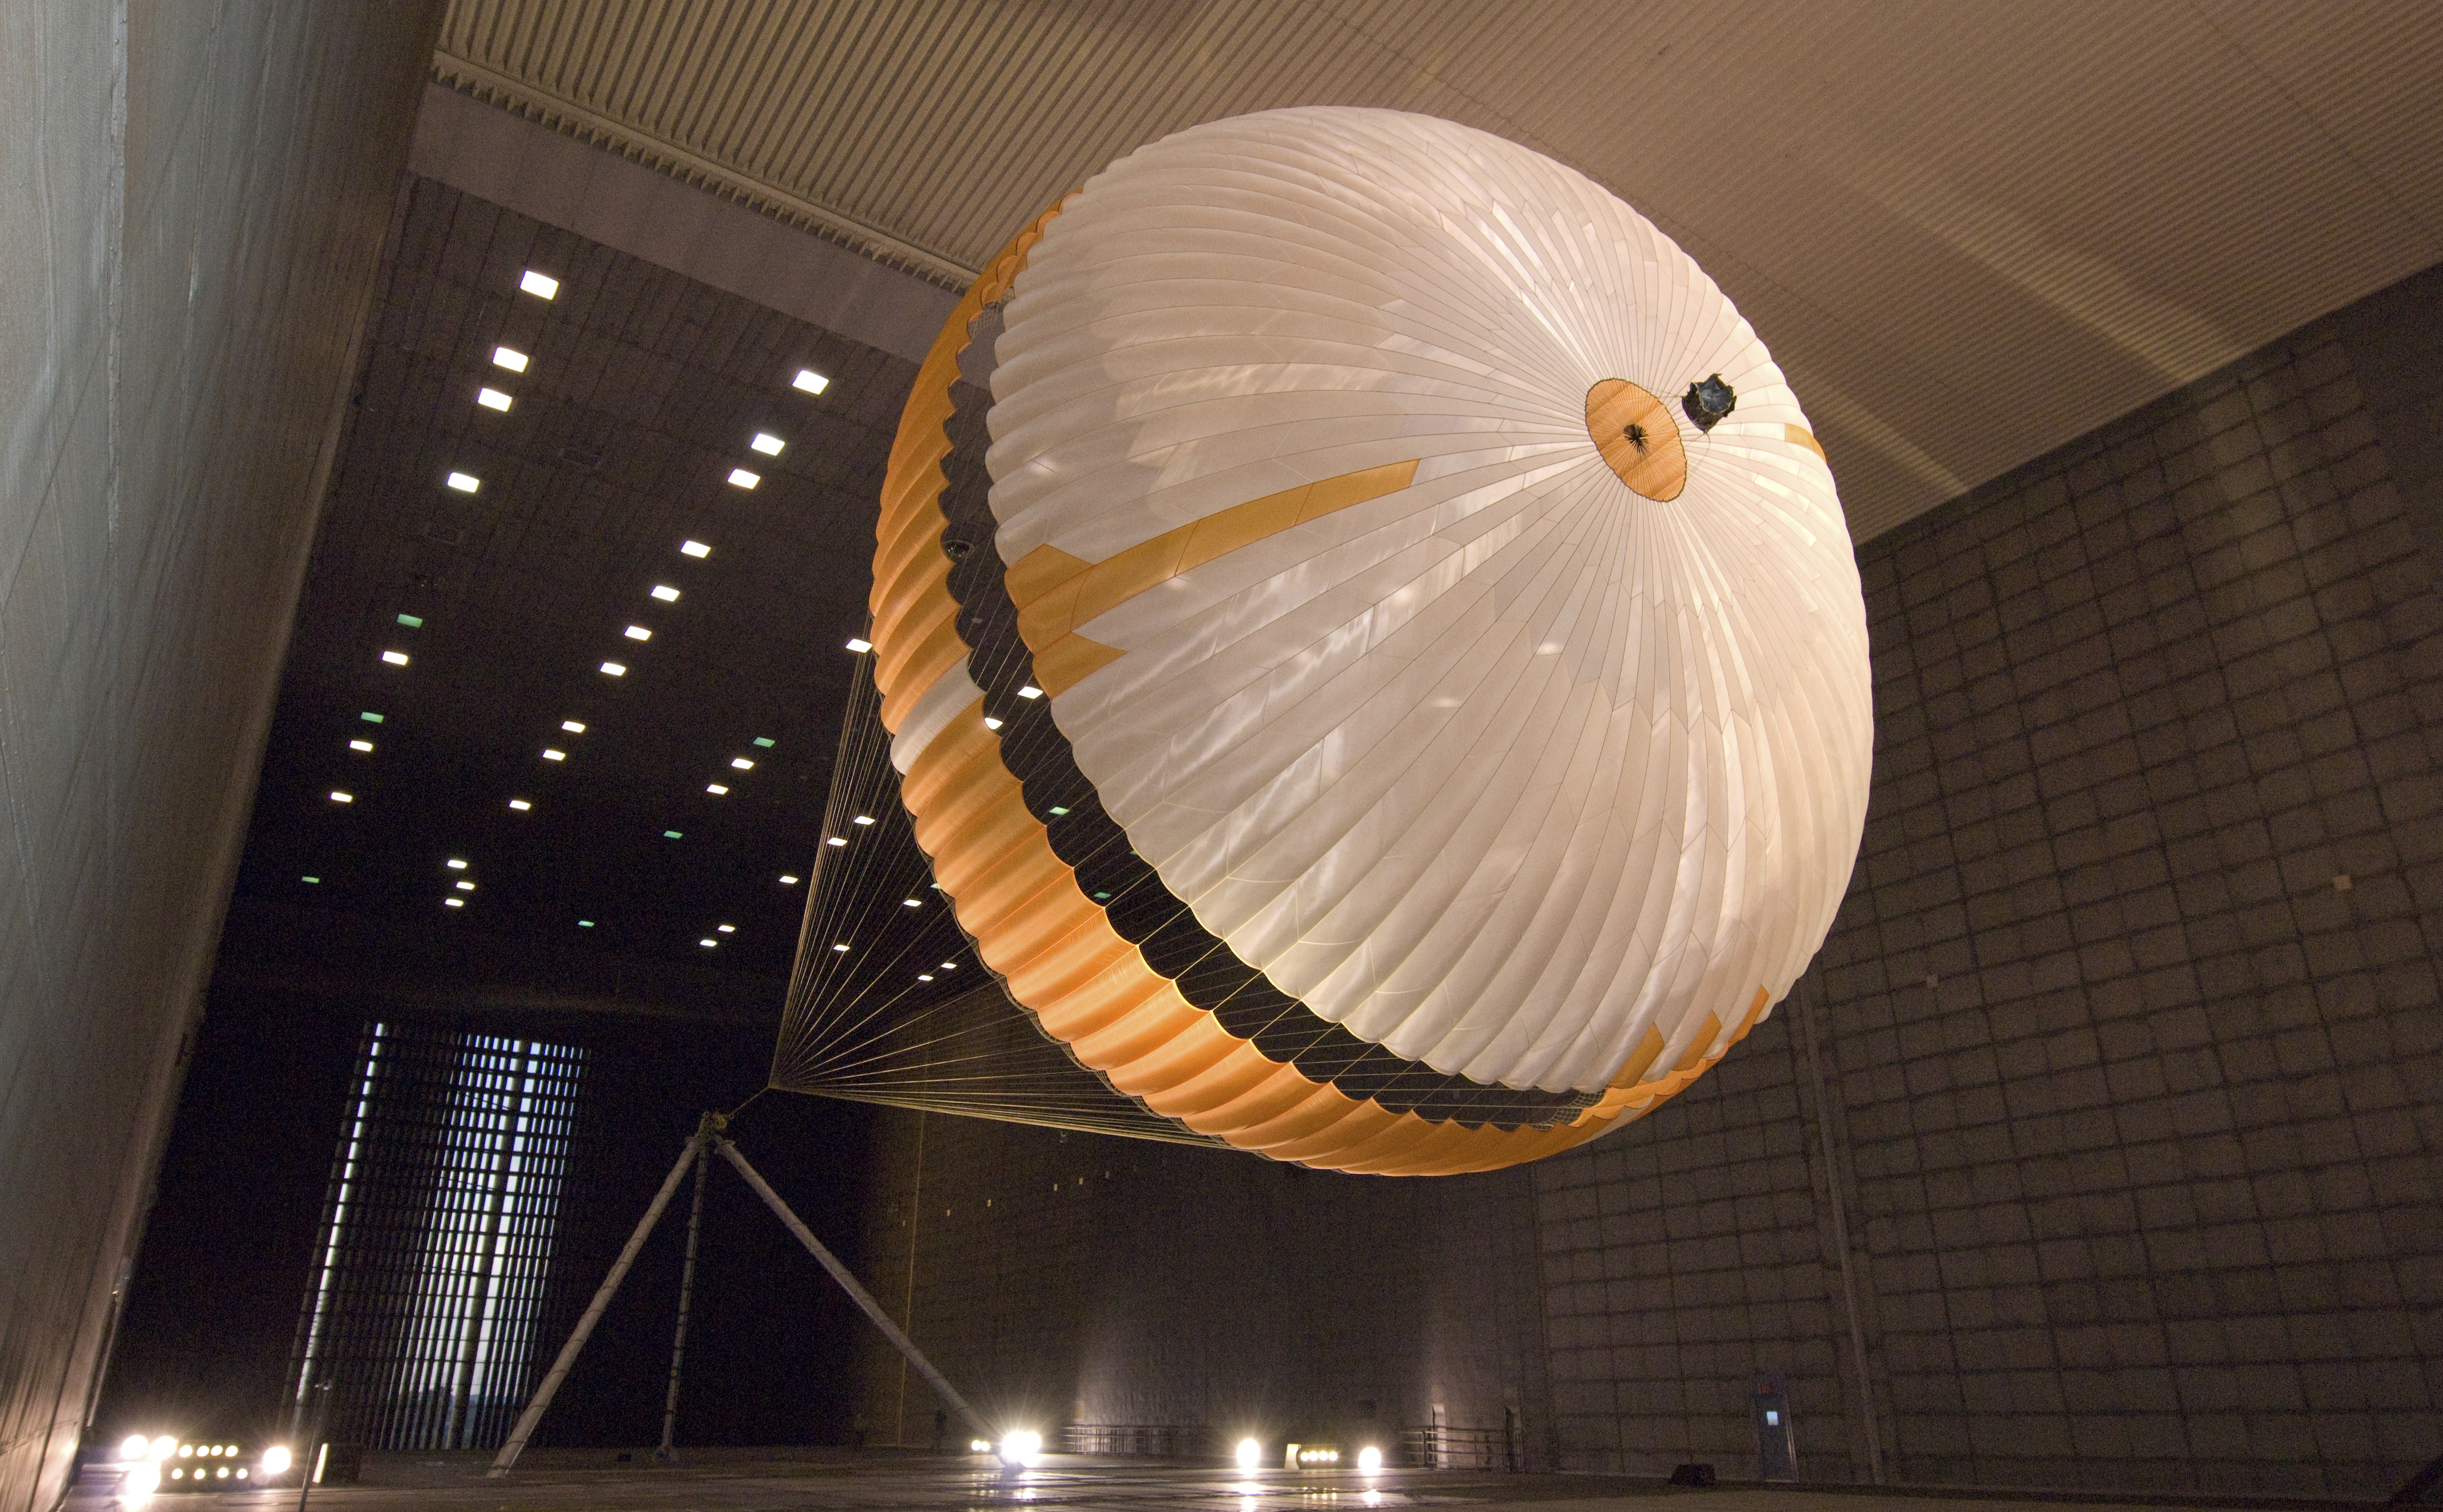 Mars Parachute Testing in World's Largest Wind Tunnel